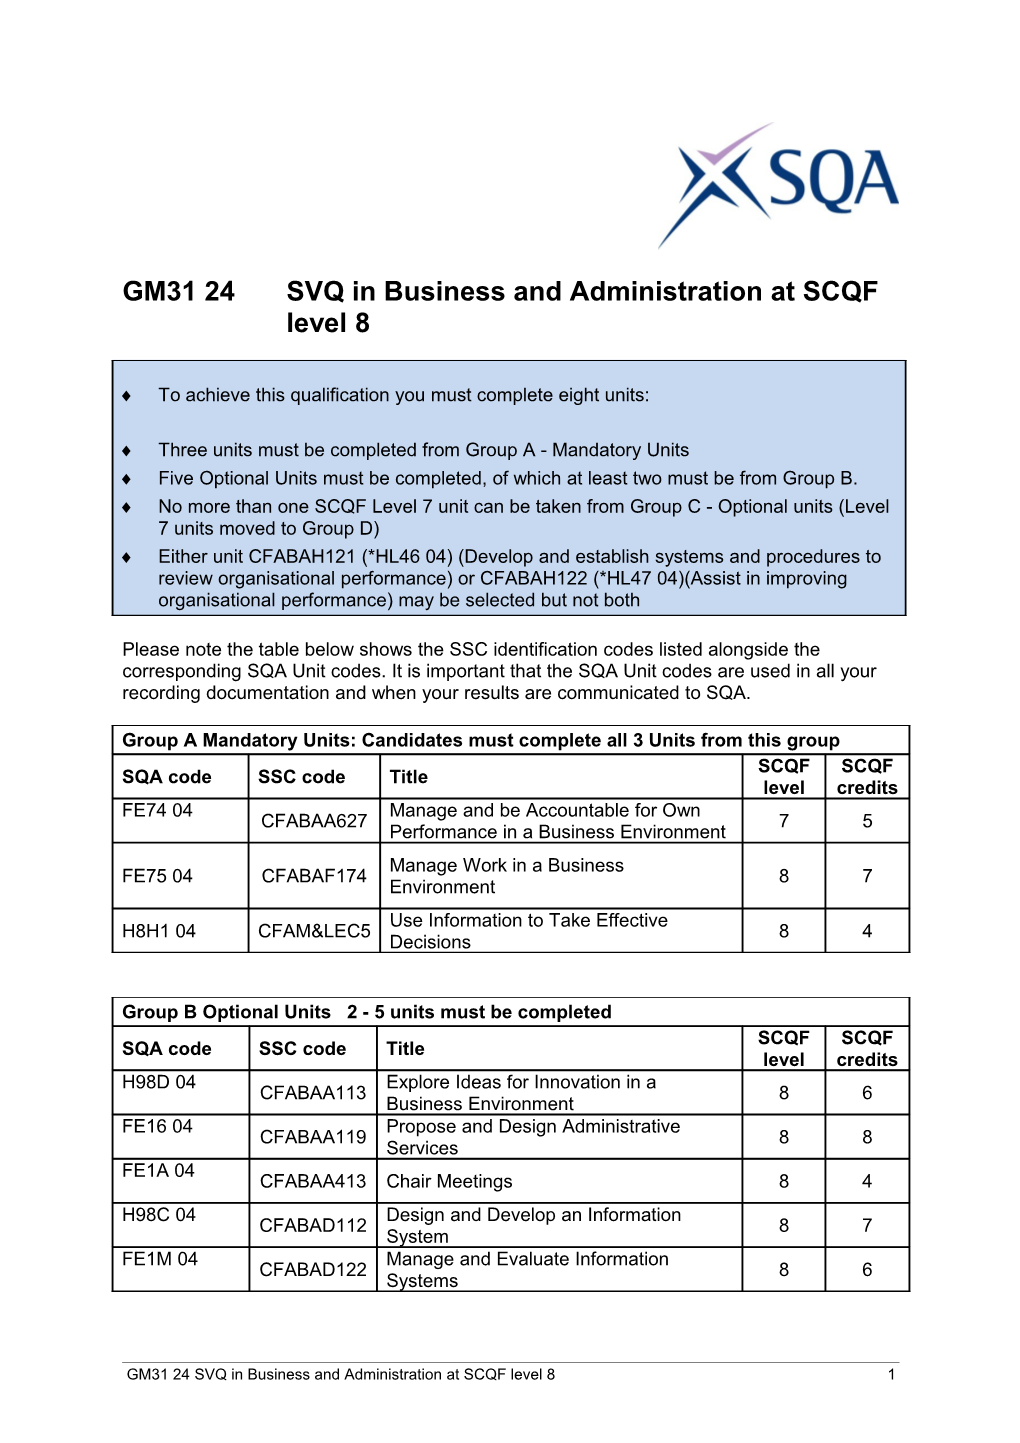 GM31 24SVQ in Business and Administration at SCQF Level 81